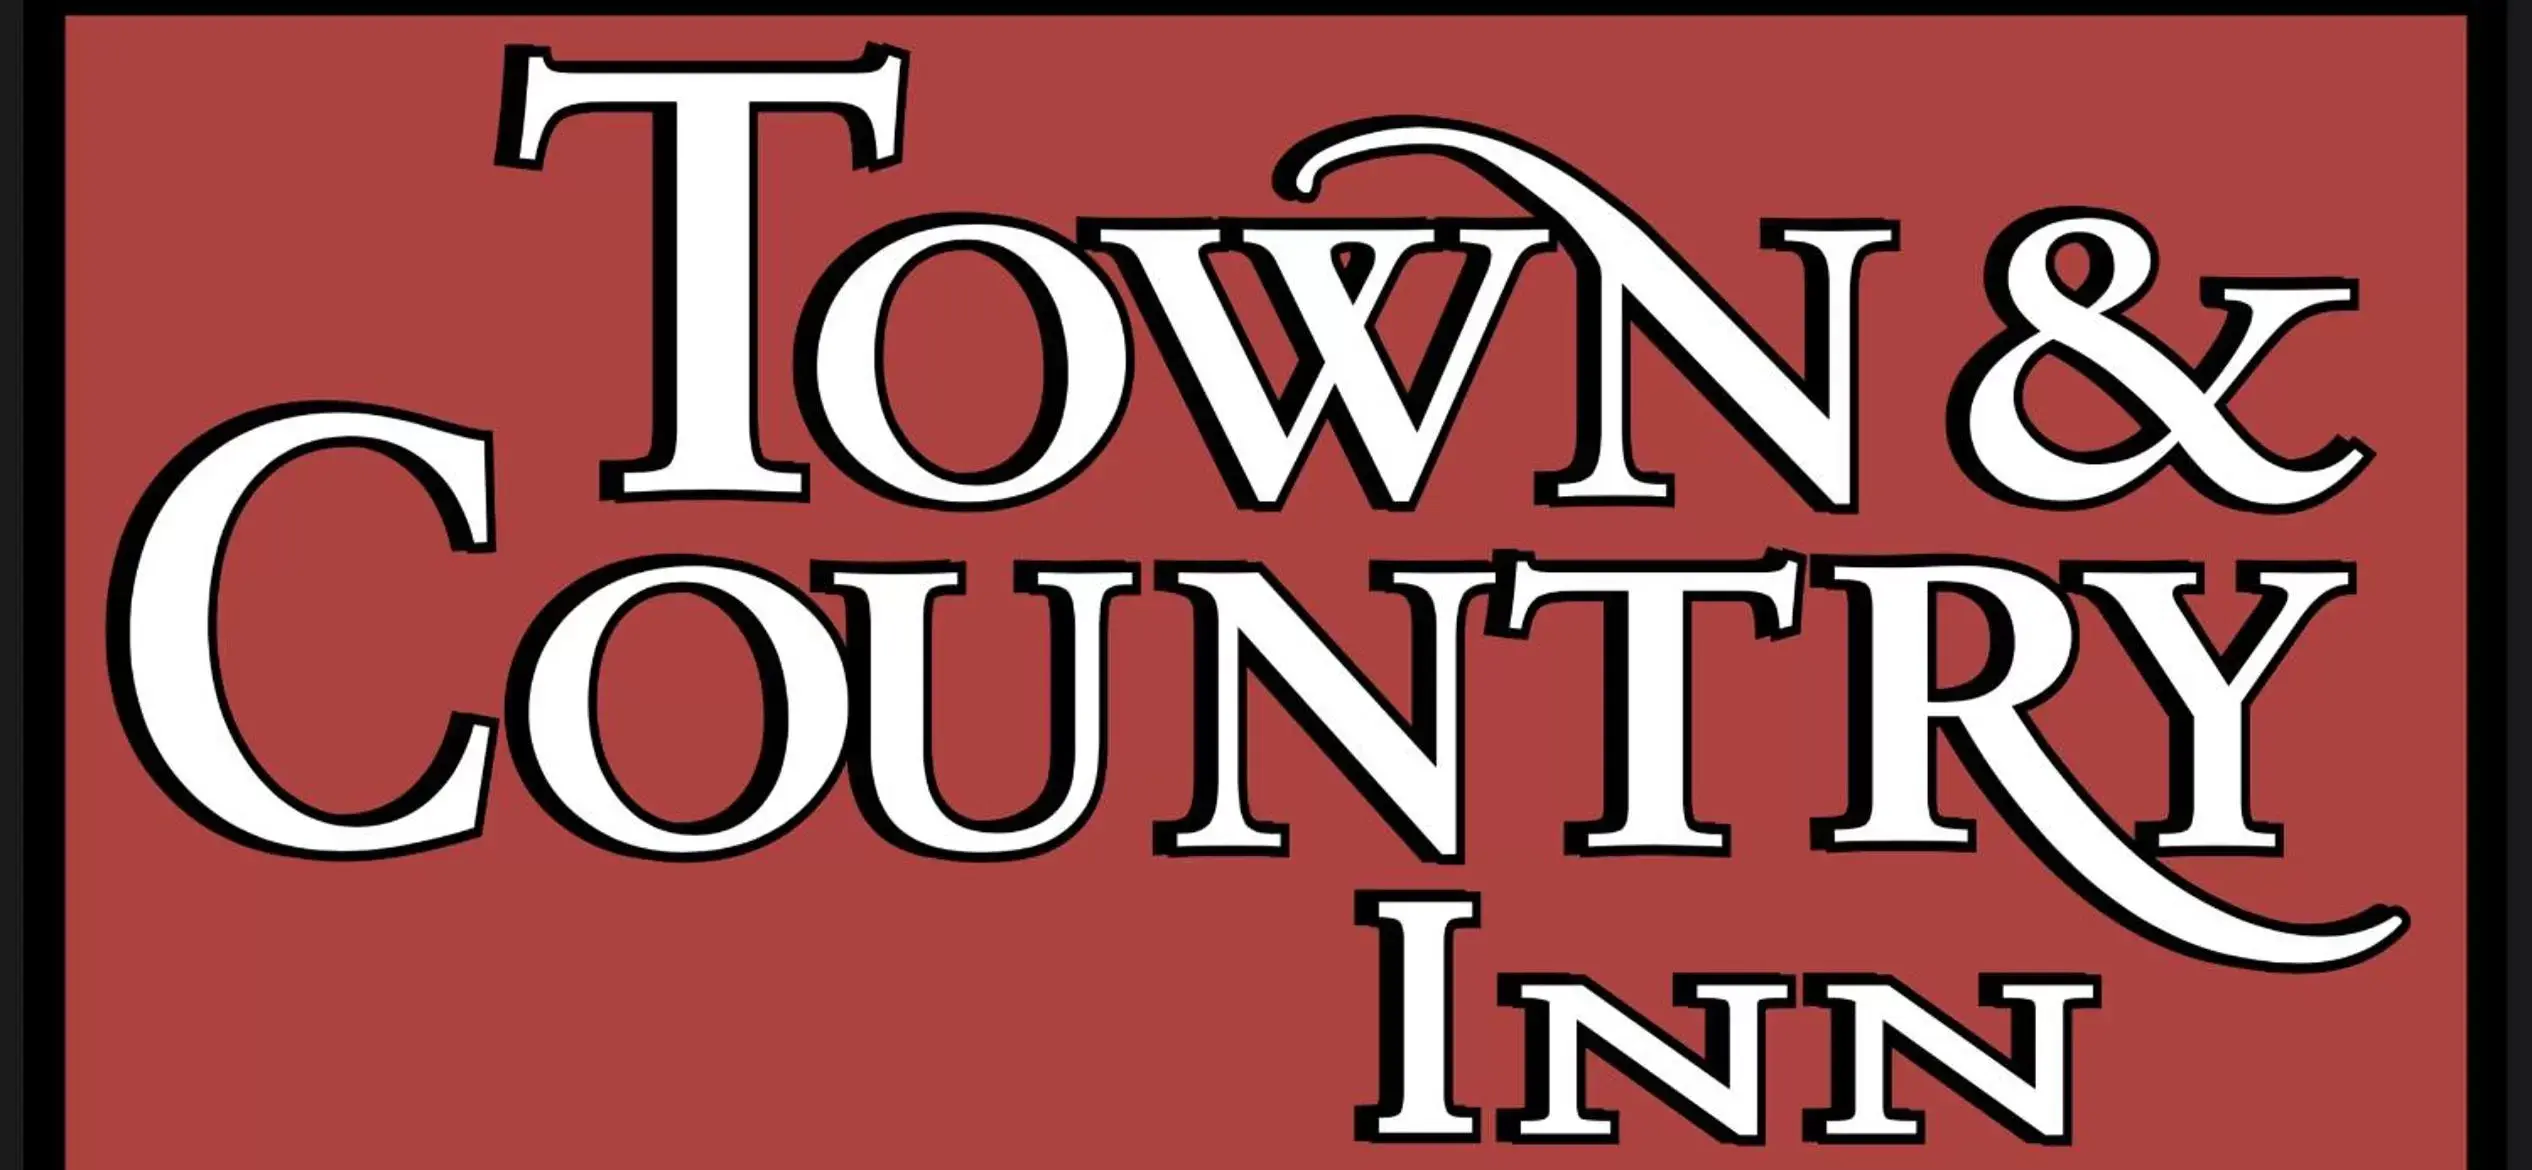 Property logo or sign in Town & Country Inn